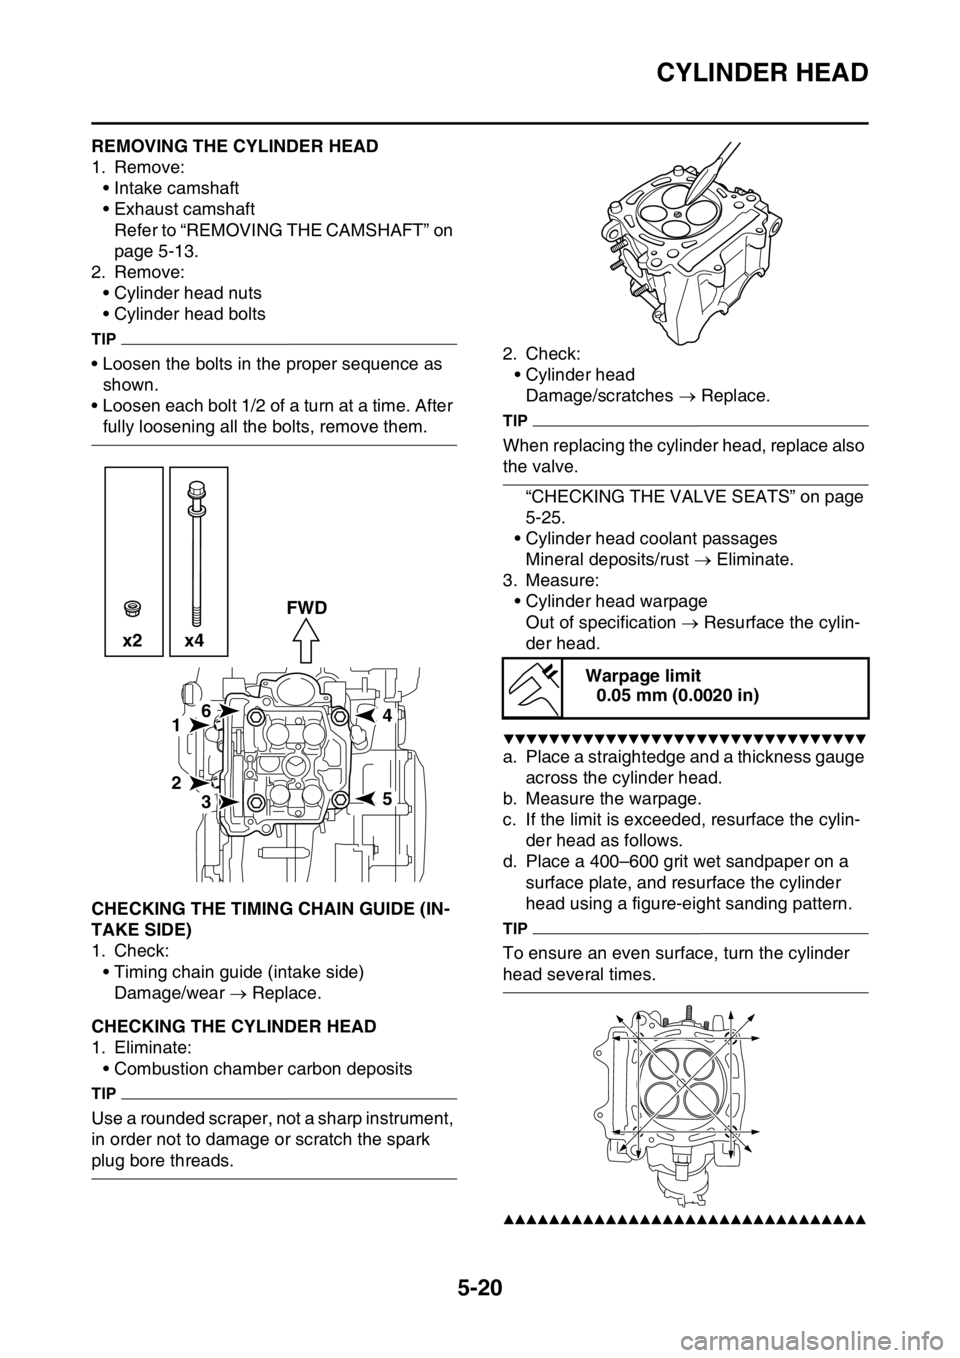 YAMAHA YZ250F 2015  Owners Manual CYLINDER HEAD
5-20
EAS1SM5216REMOVING THE CYLINDER HEAD
1. Remove:
• Intake camshaft
• Exhaust camshaft
Refer to “REMOVING THE CAMSHAFT” on 
page 5-13.
2. Remove:
• Cylinder head nuts
• Cy